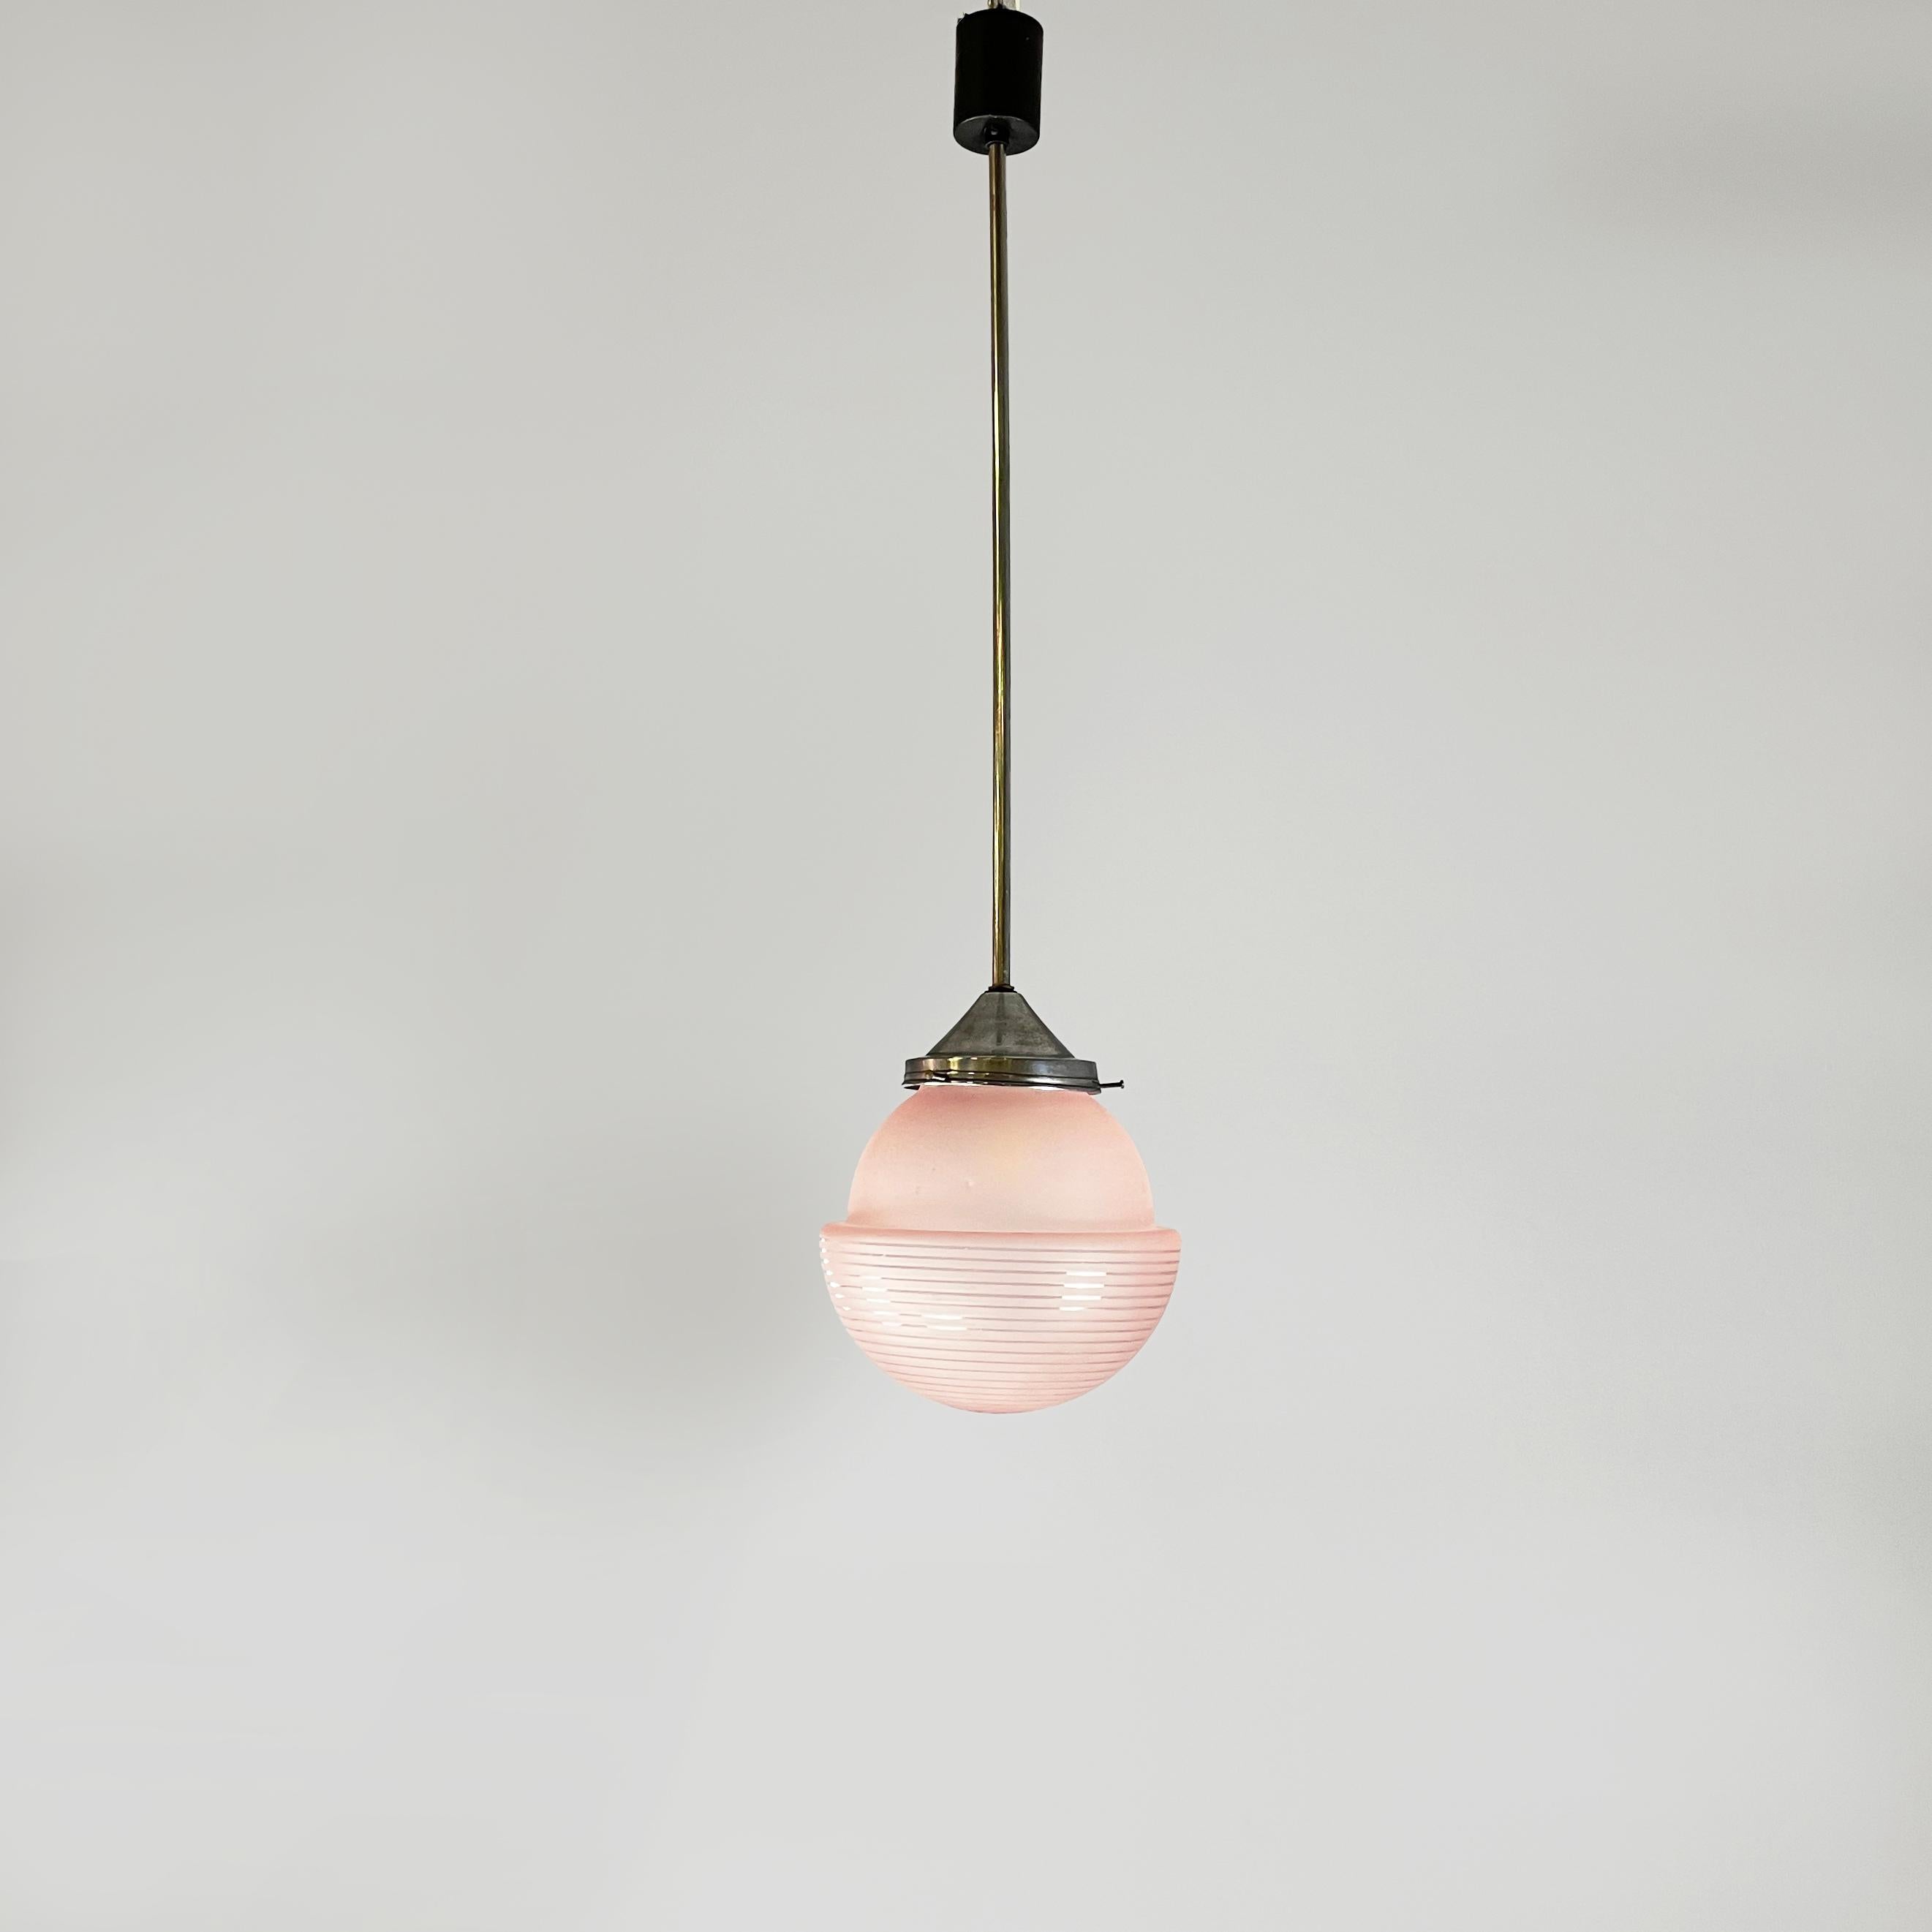 Italian mid-century modern Ceiling lamp in pink glass and metal, 1940s
Ceiling lamp with spherical cantilevered diffuser in pink satin glass with decorations of concentric circles in pink glass. The metal structure of the chandelier is composed of a